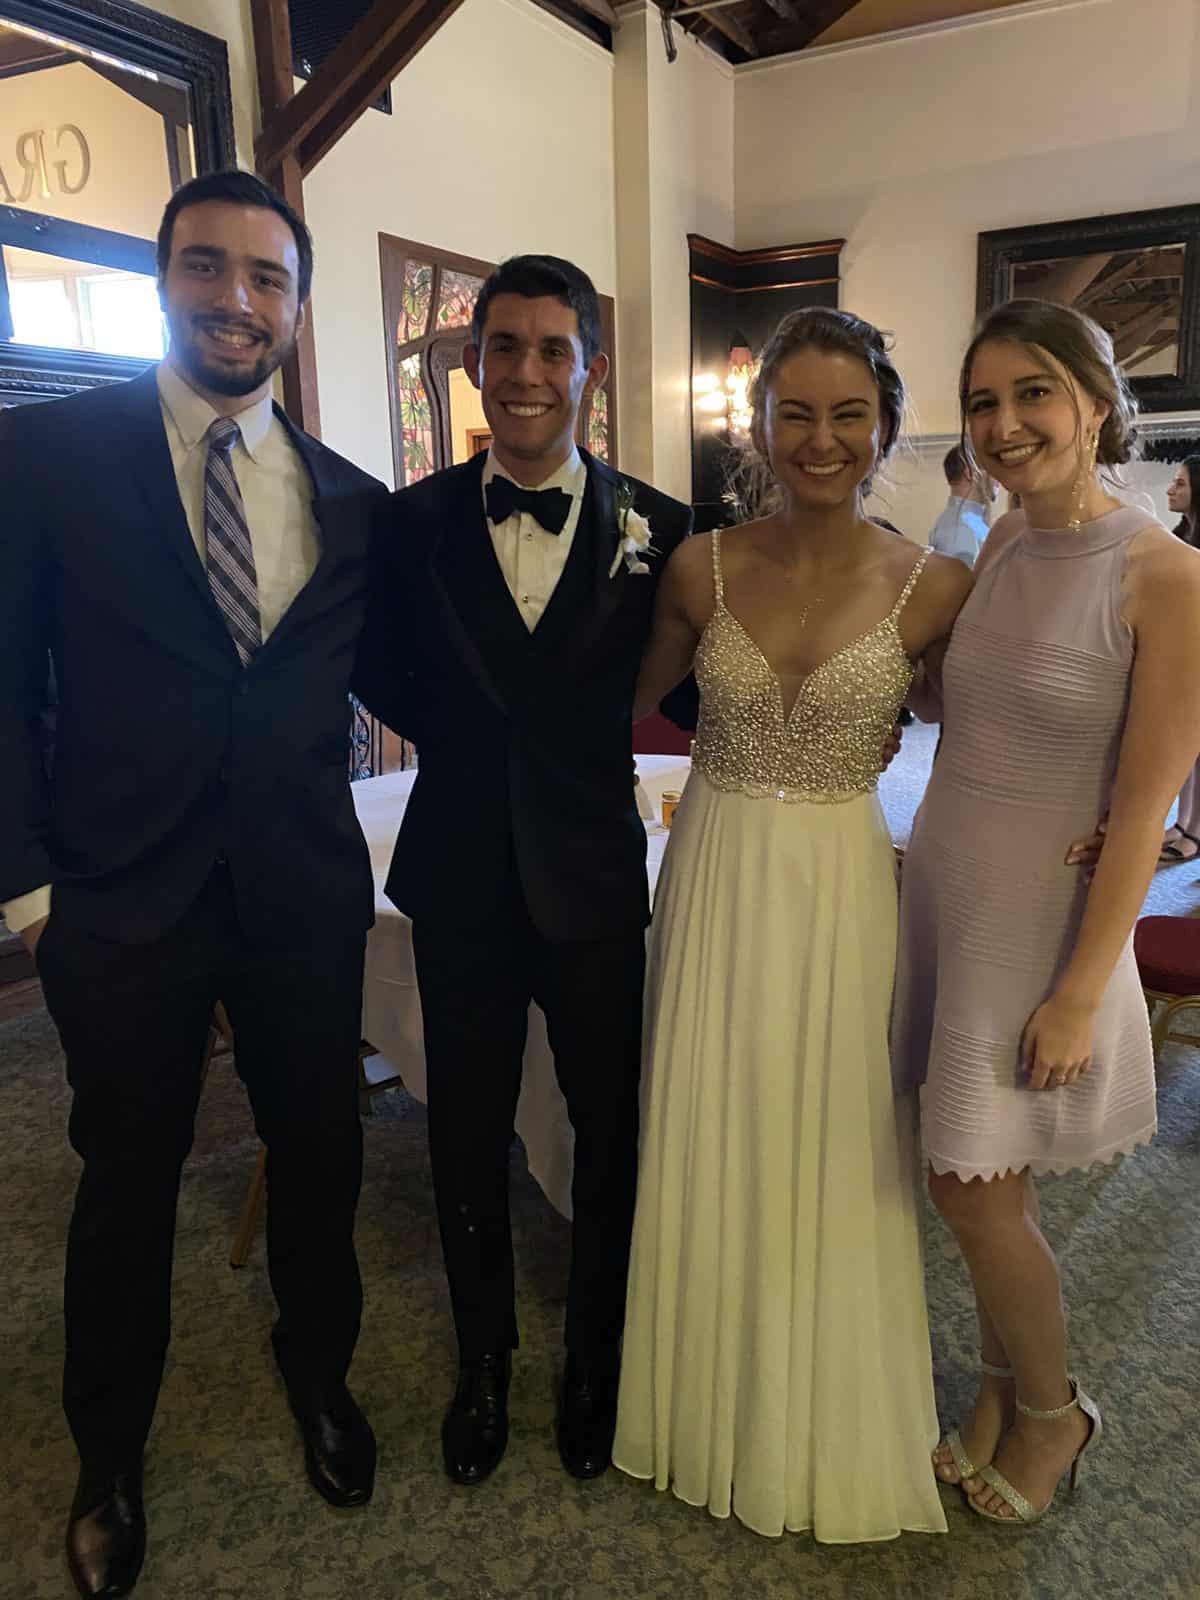 A bride and groom posing with two wedding guests.